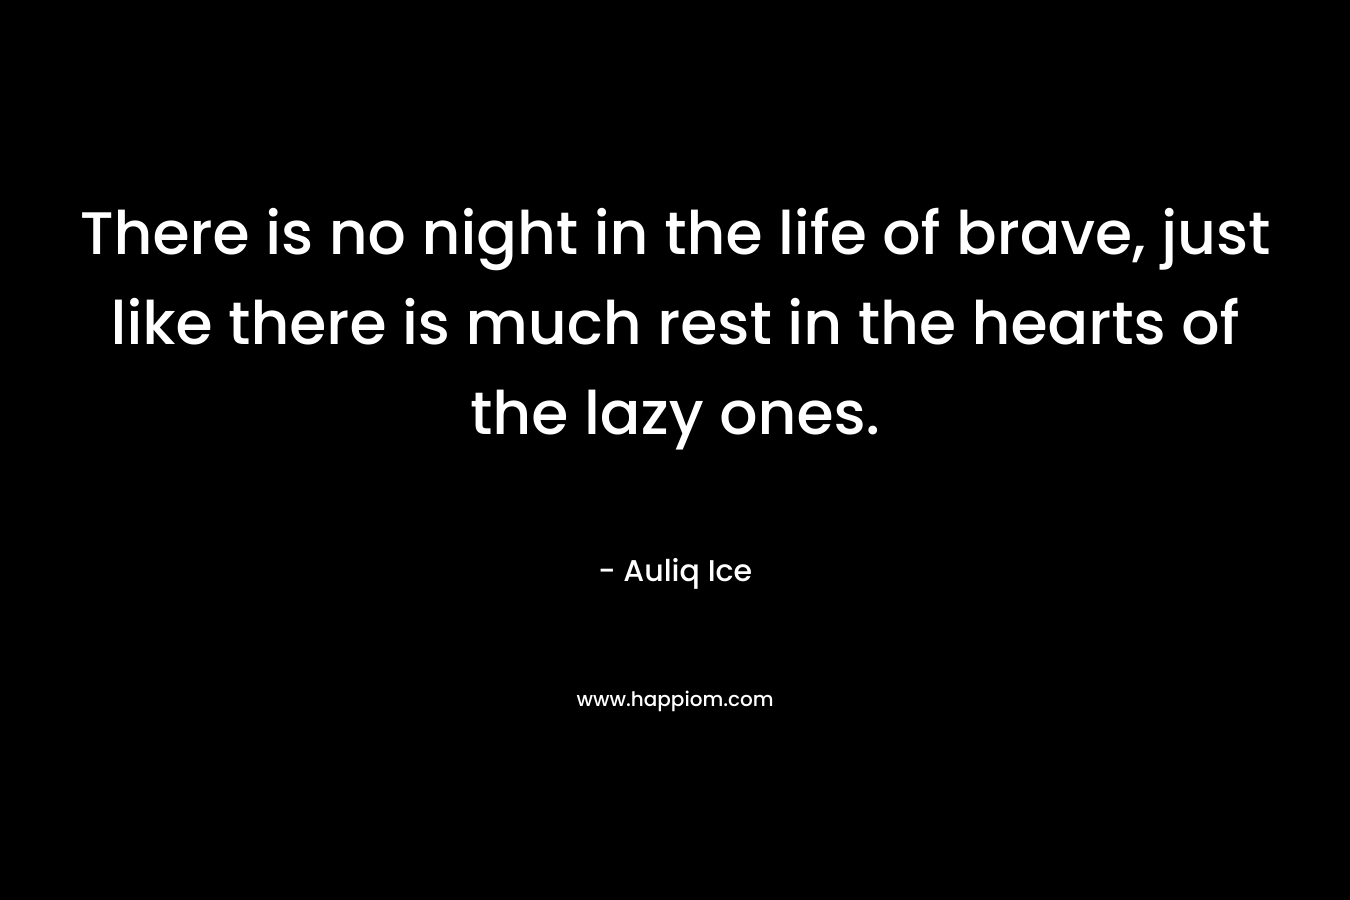 There is no night in the life of brave, just like there is much rest in the hearts of the lazy ones.